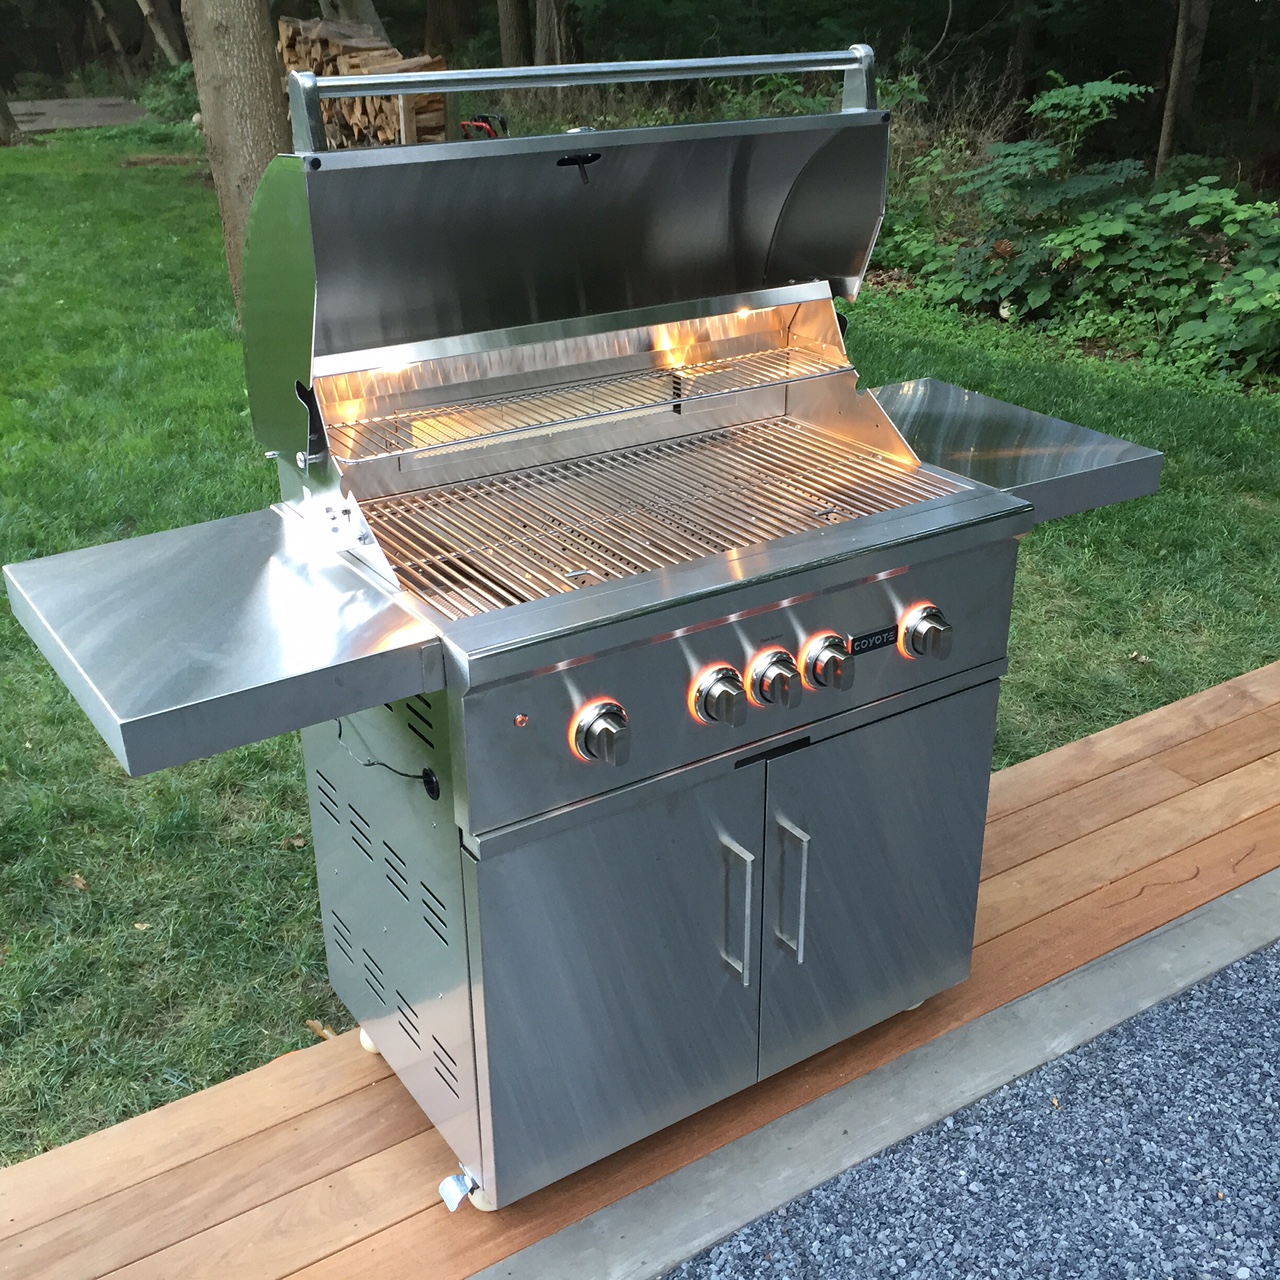 Unboxing Coyote Grill For Outdoor Kitchen Jon Peters Art Home